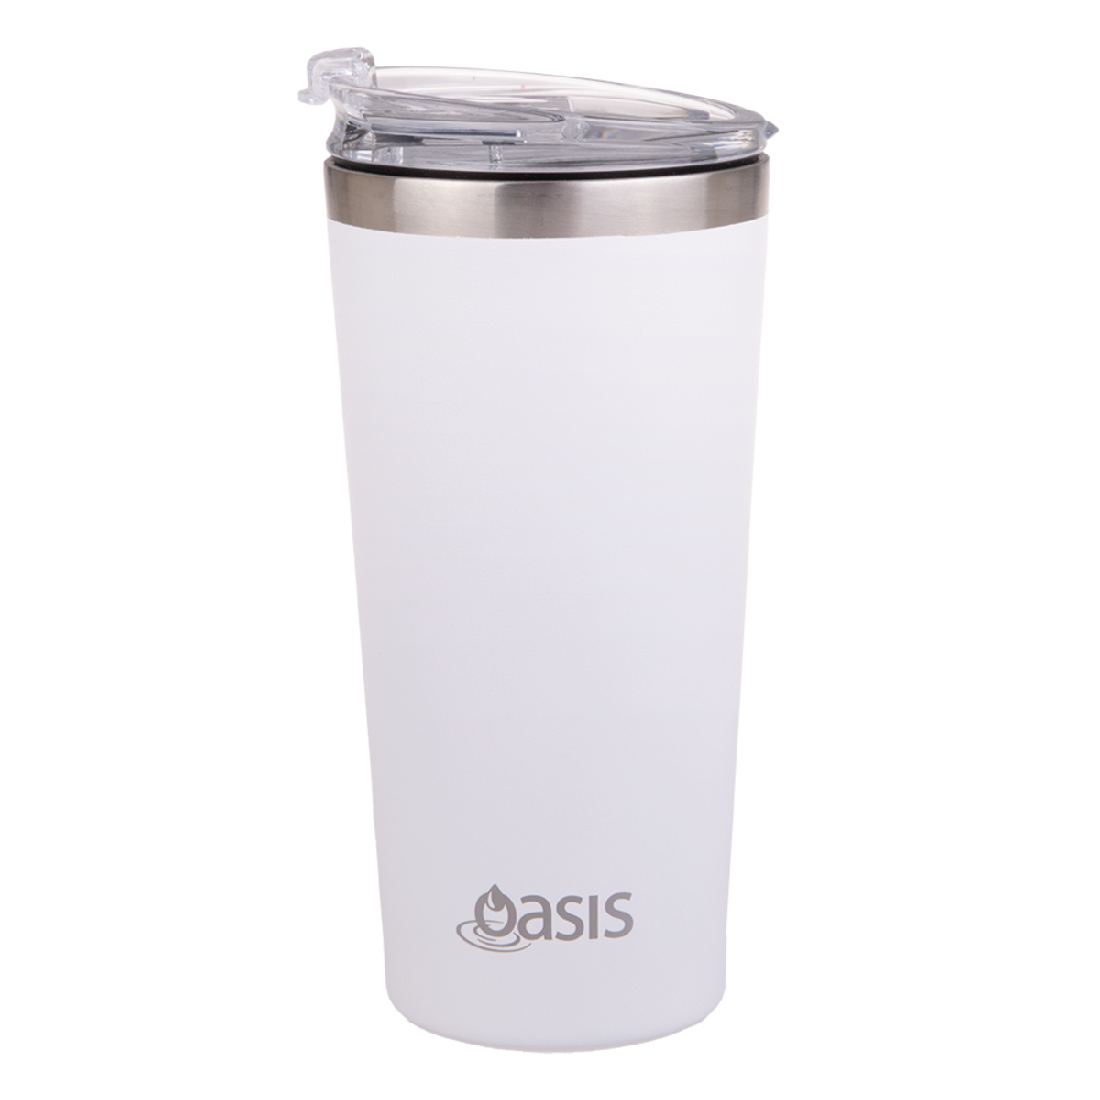 Oasis S/s Double Wall Insulated 'travel Mug' 480ml - White